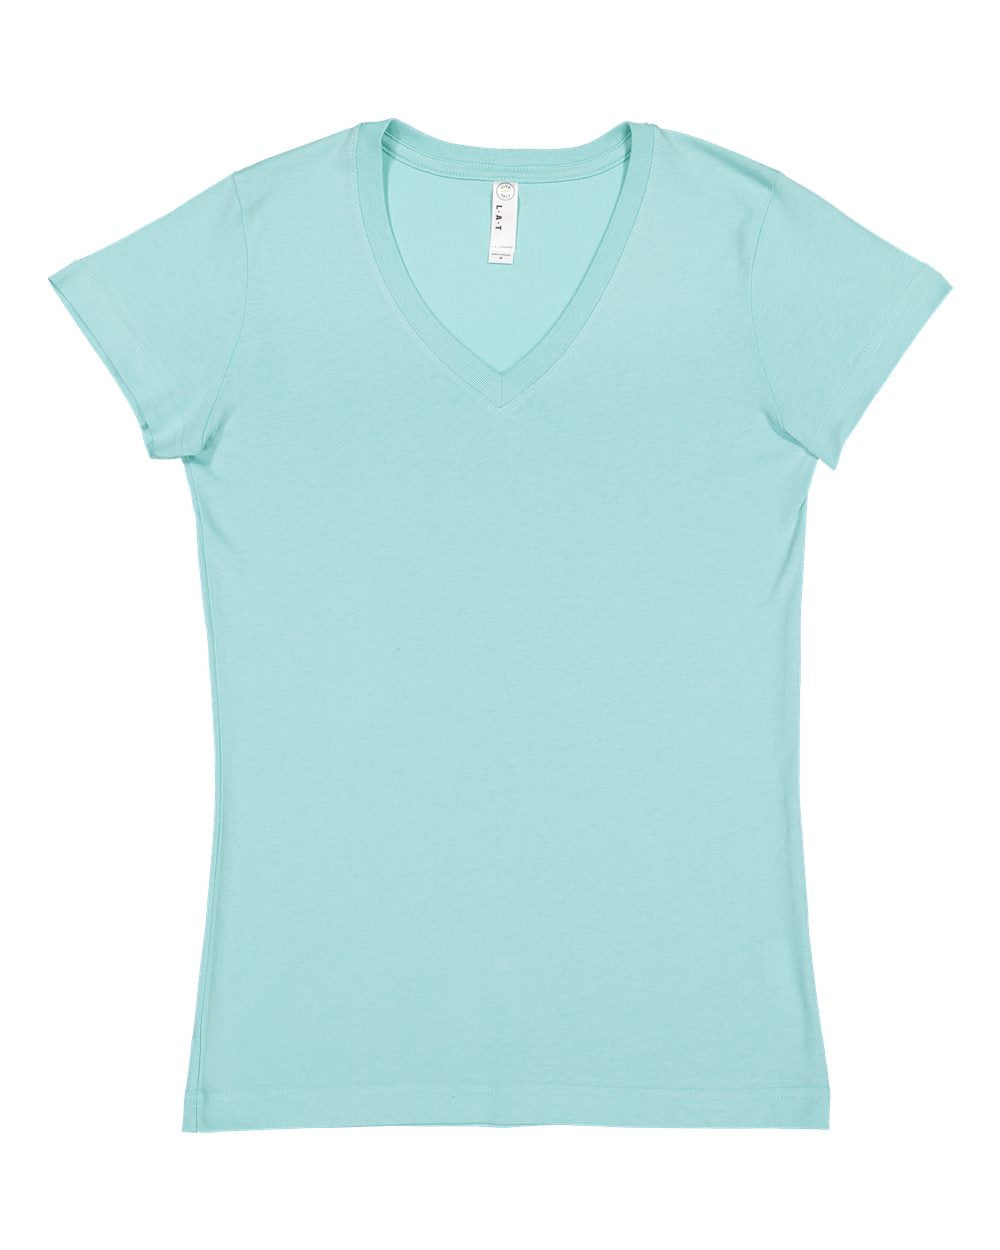 Ladies (Junior) Fitted -- (V-Neck) T-Shirt  -- 100% Cotton --  Chill Color